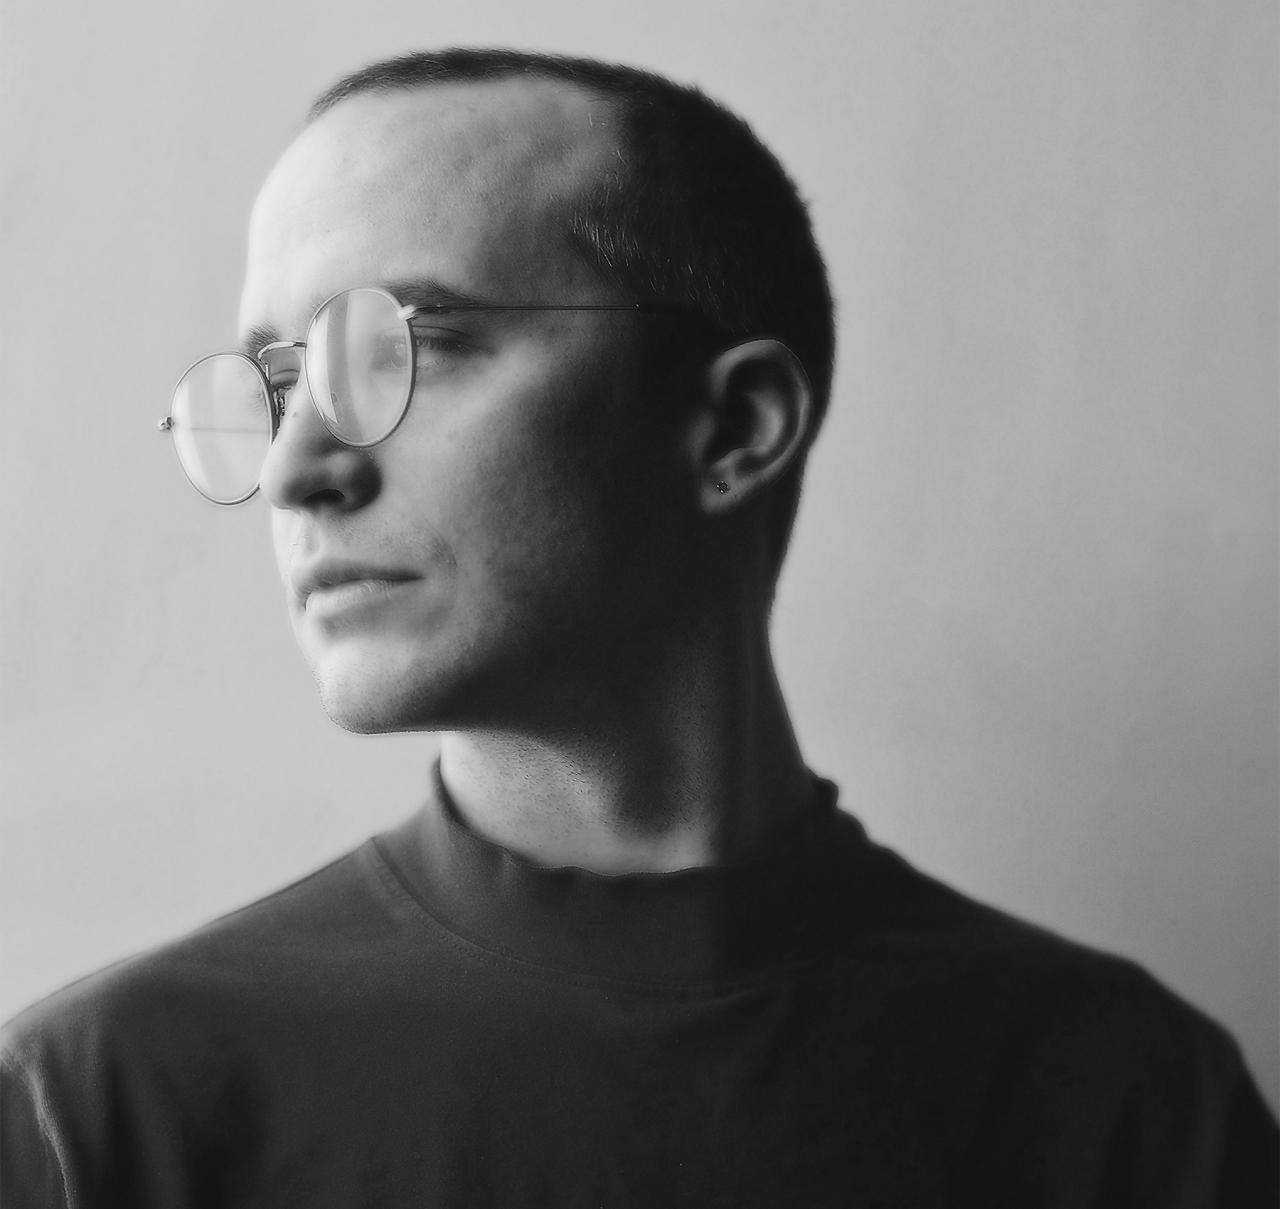 Black and White Portrait of a Man with glasses